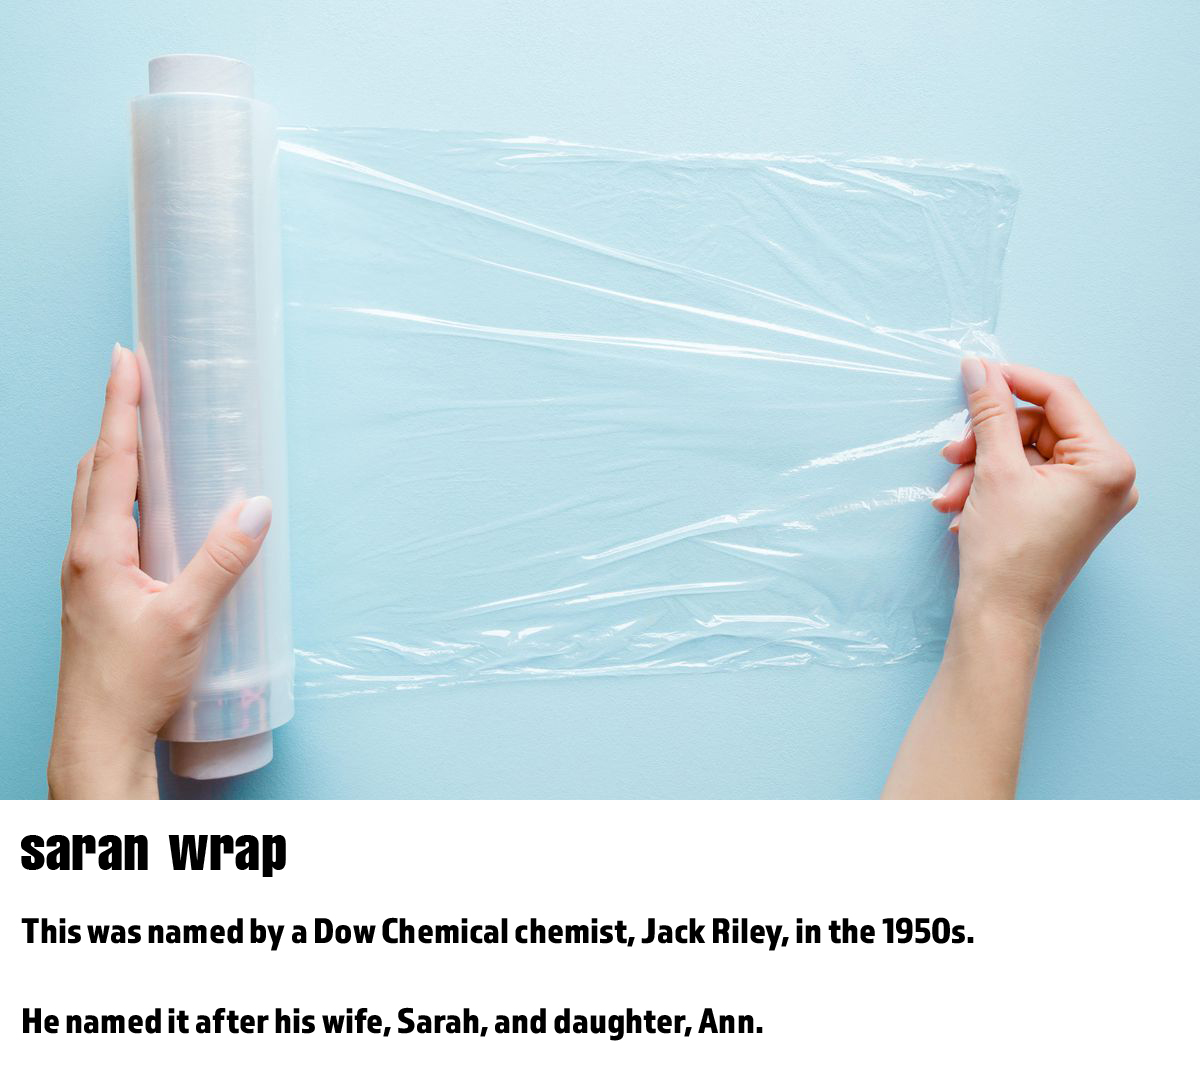 fun word origins history facts - saran wrap - This was named by a Dow Chemical chemist, Jack Riley, in the 1950s. He named it after his wife, Sarah, and daughter, Ann.